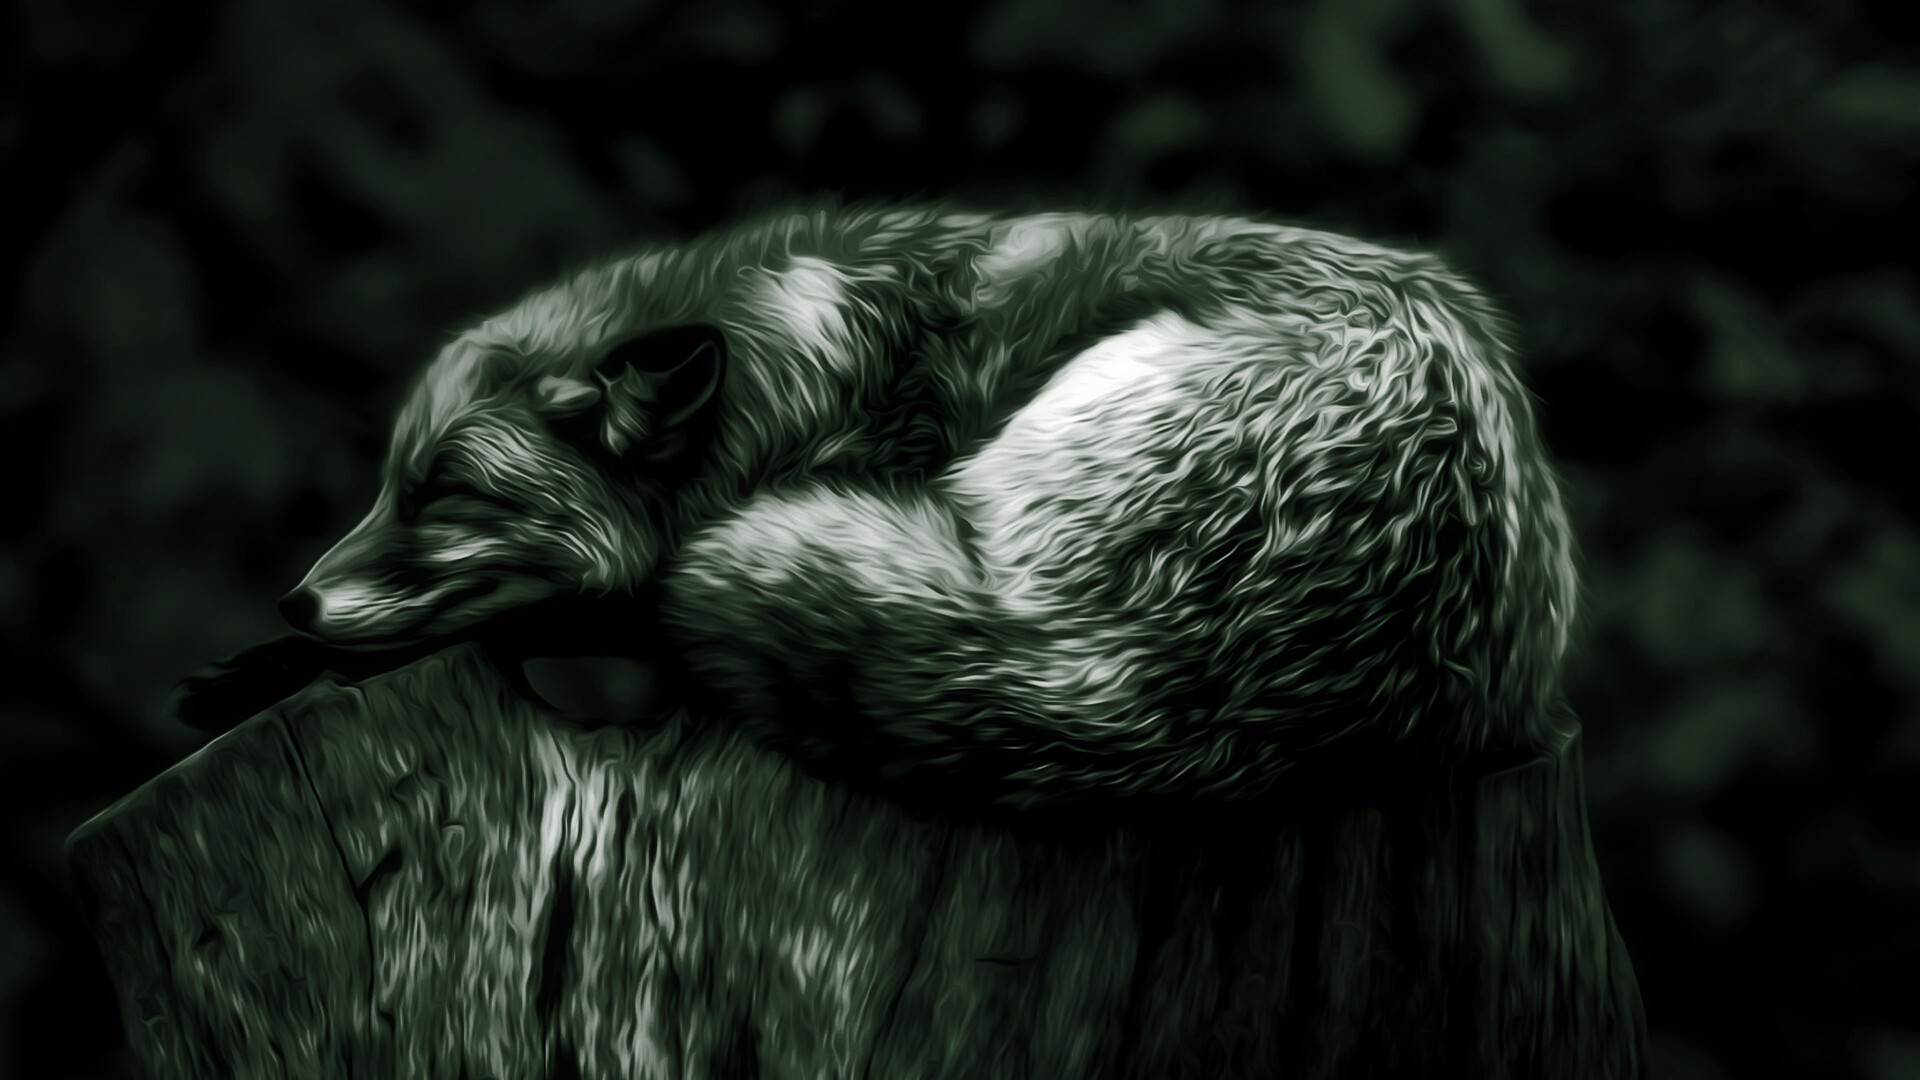 Fox: Vulpes vulpes, The most widely distributed members of the order Carnivora, Monochrome. 1920x1080 Full HD Wallpaper.